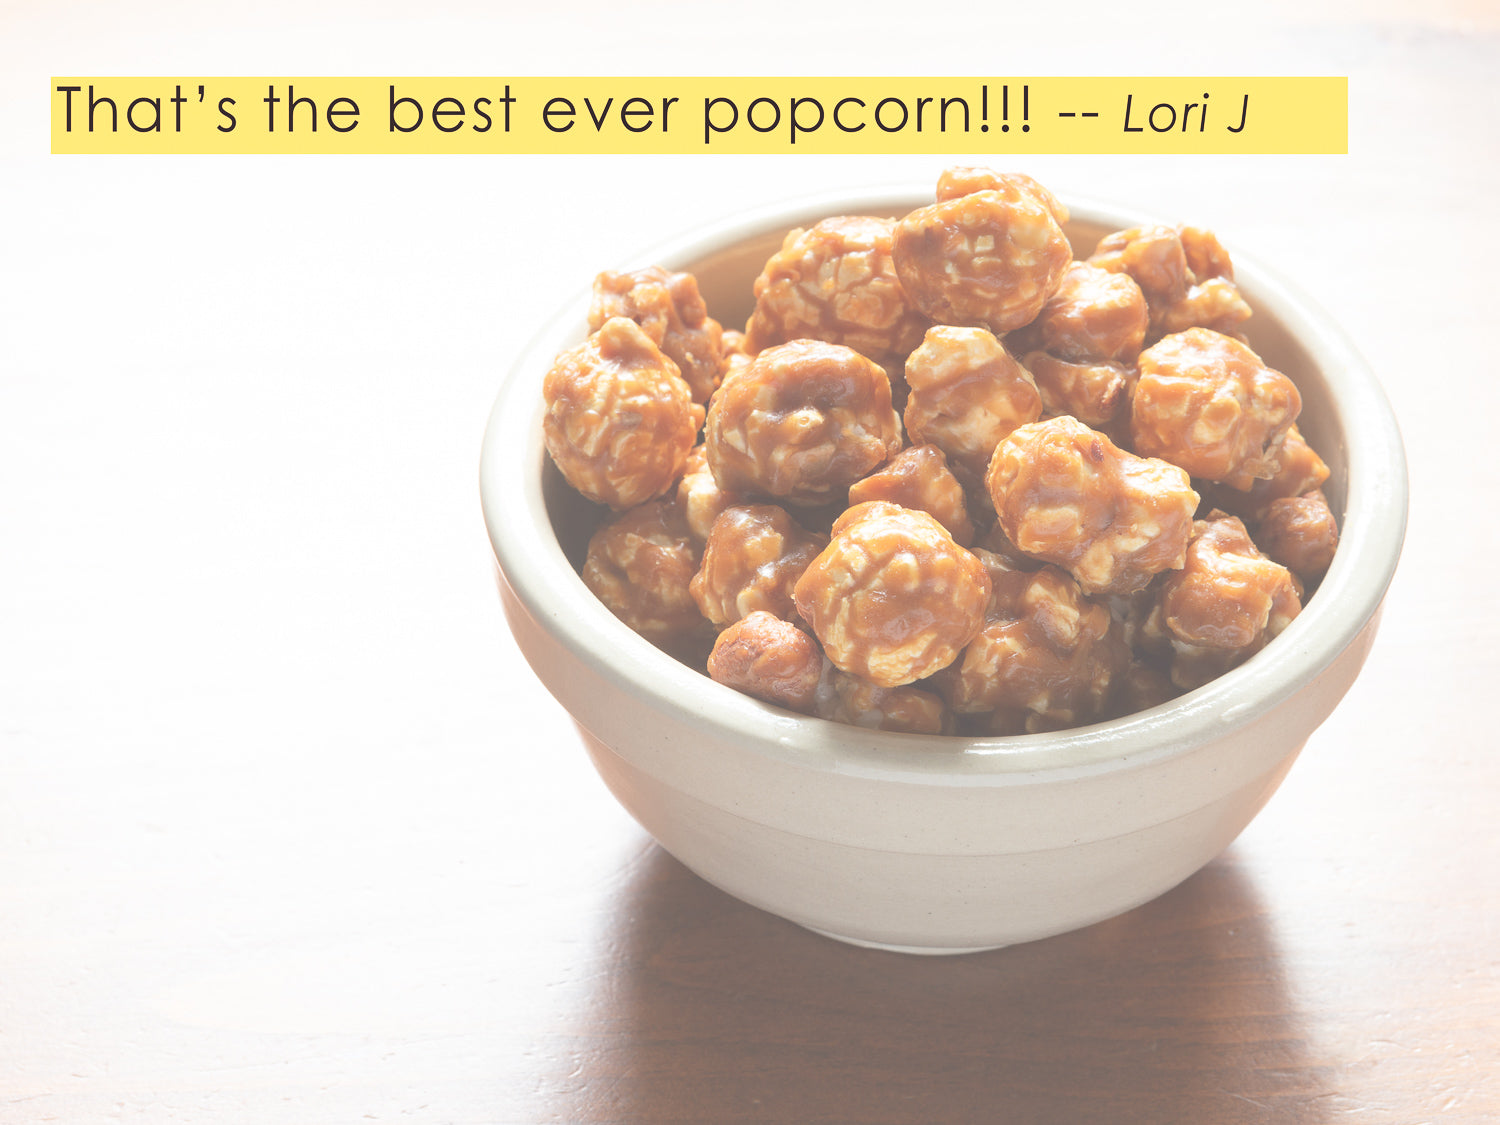 a reviewer's favorable opinion of toffee pop gourmet popcorn